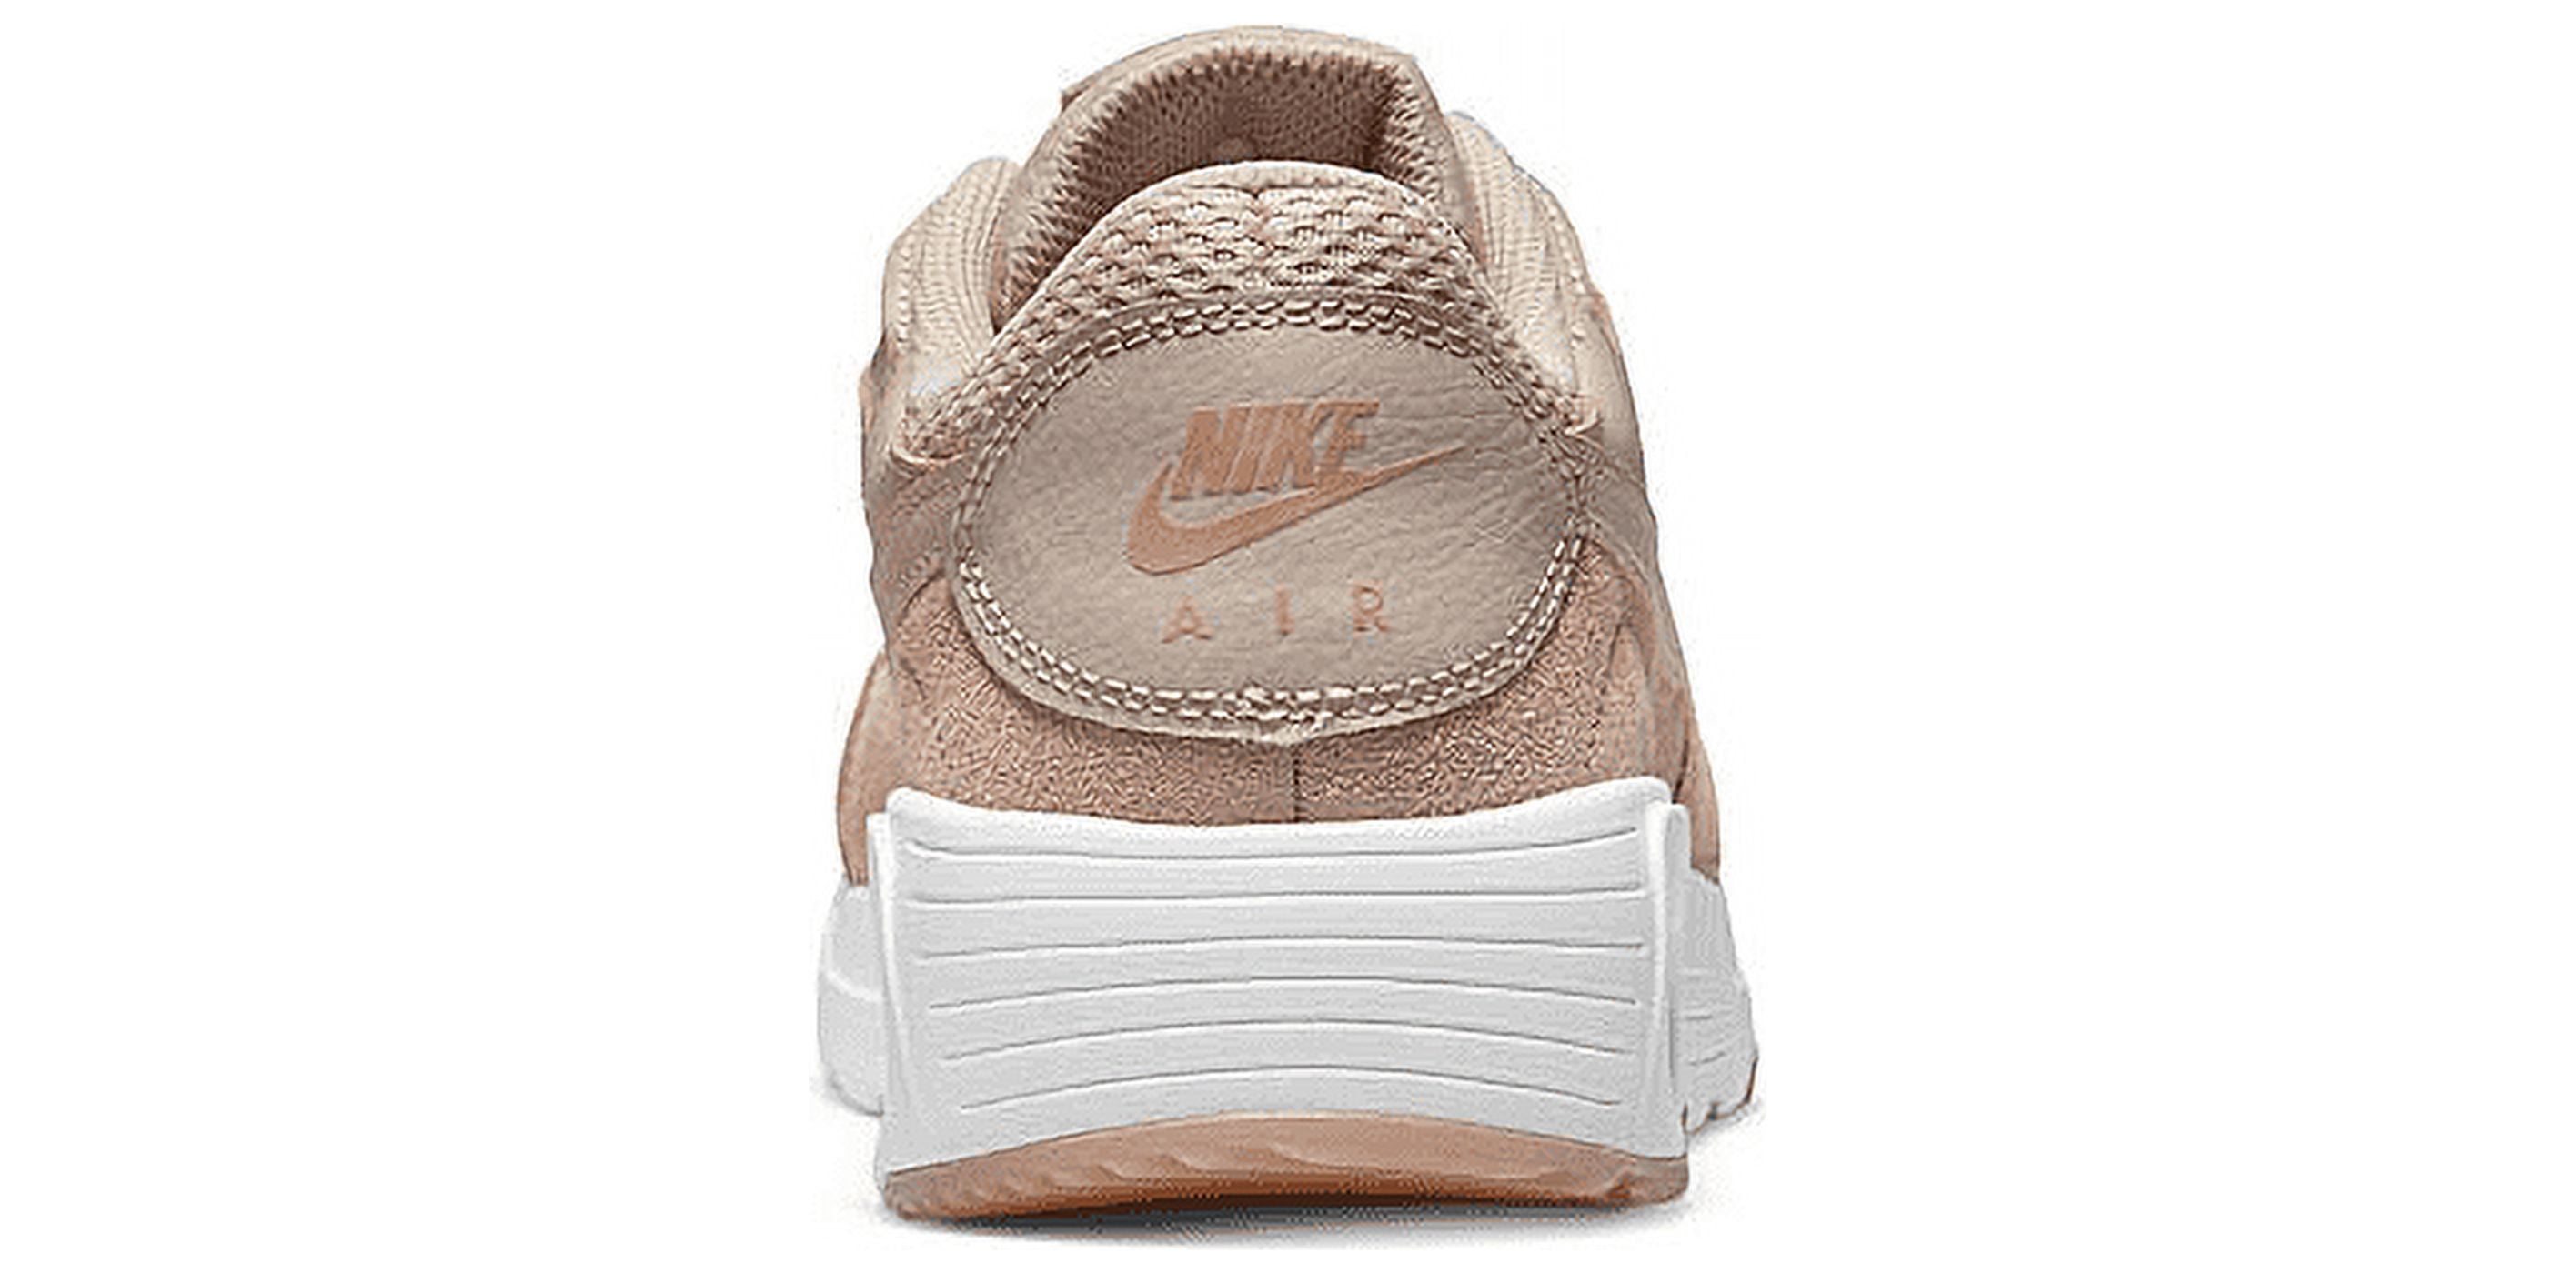 Women's Nike Air Max SC Fossil Stone/Pink Oxford (CW4554 201) - 6.5 